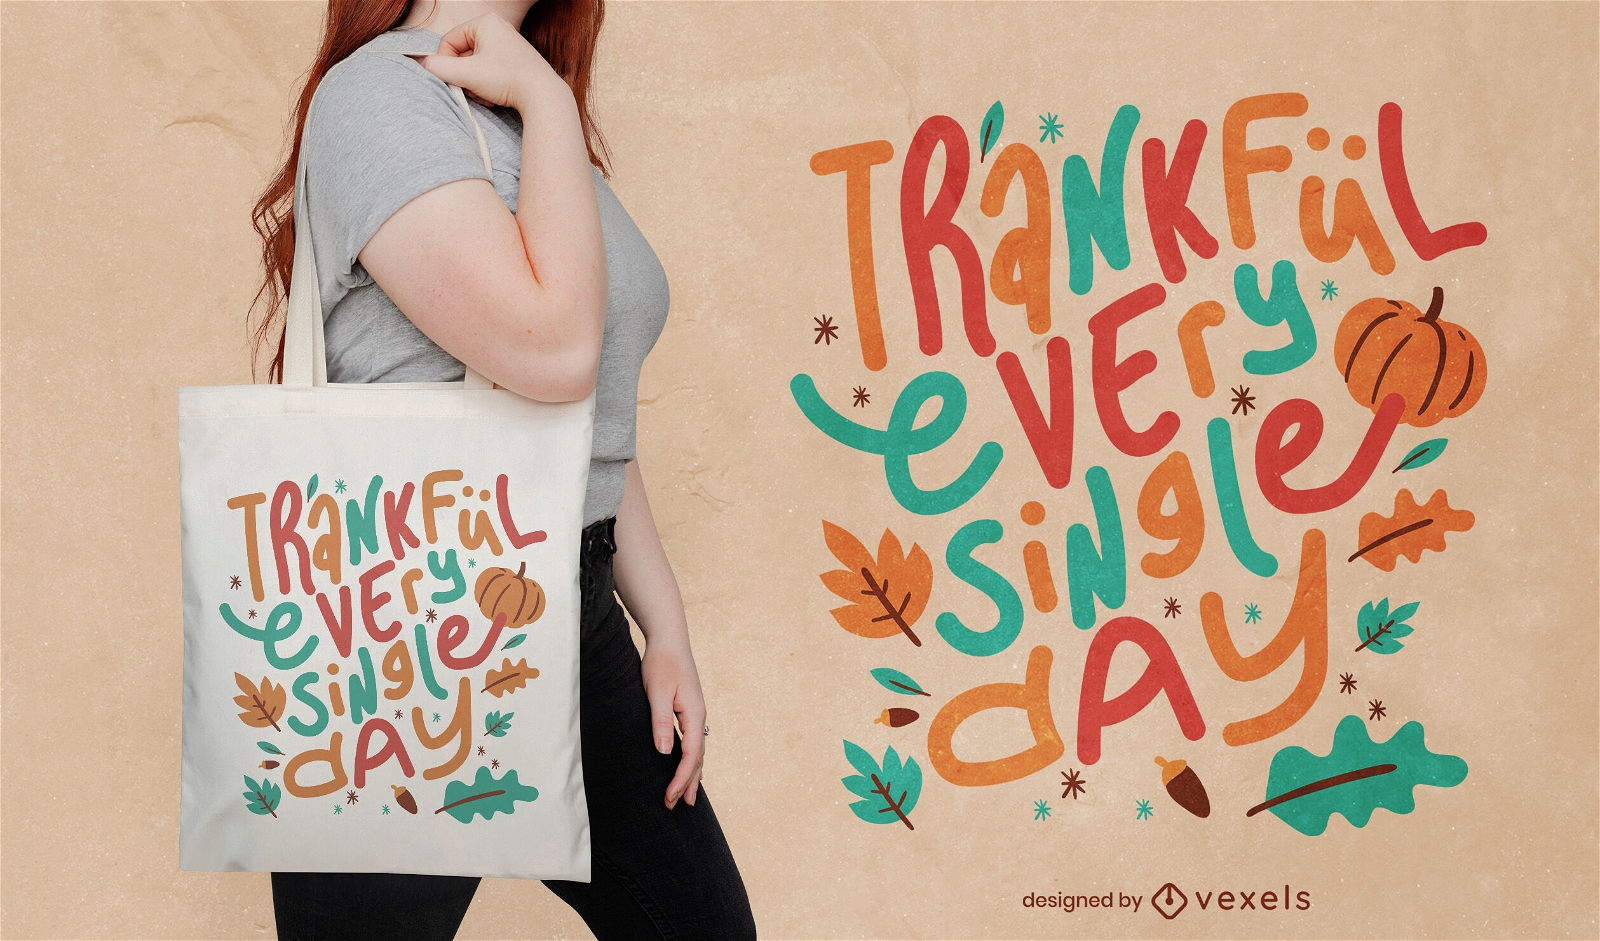 Thankful every single day tote bag design